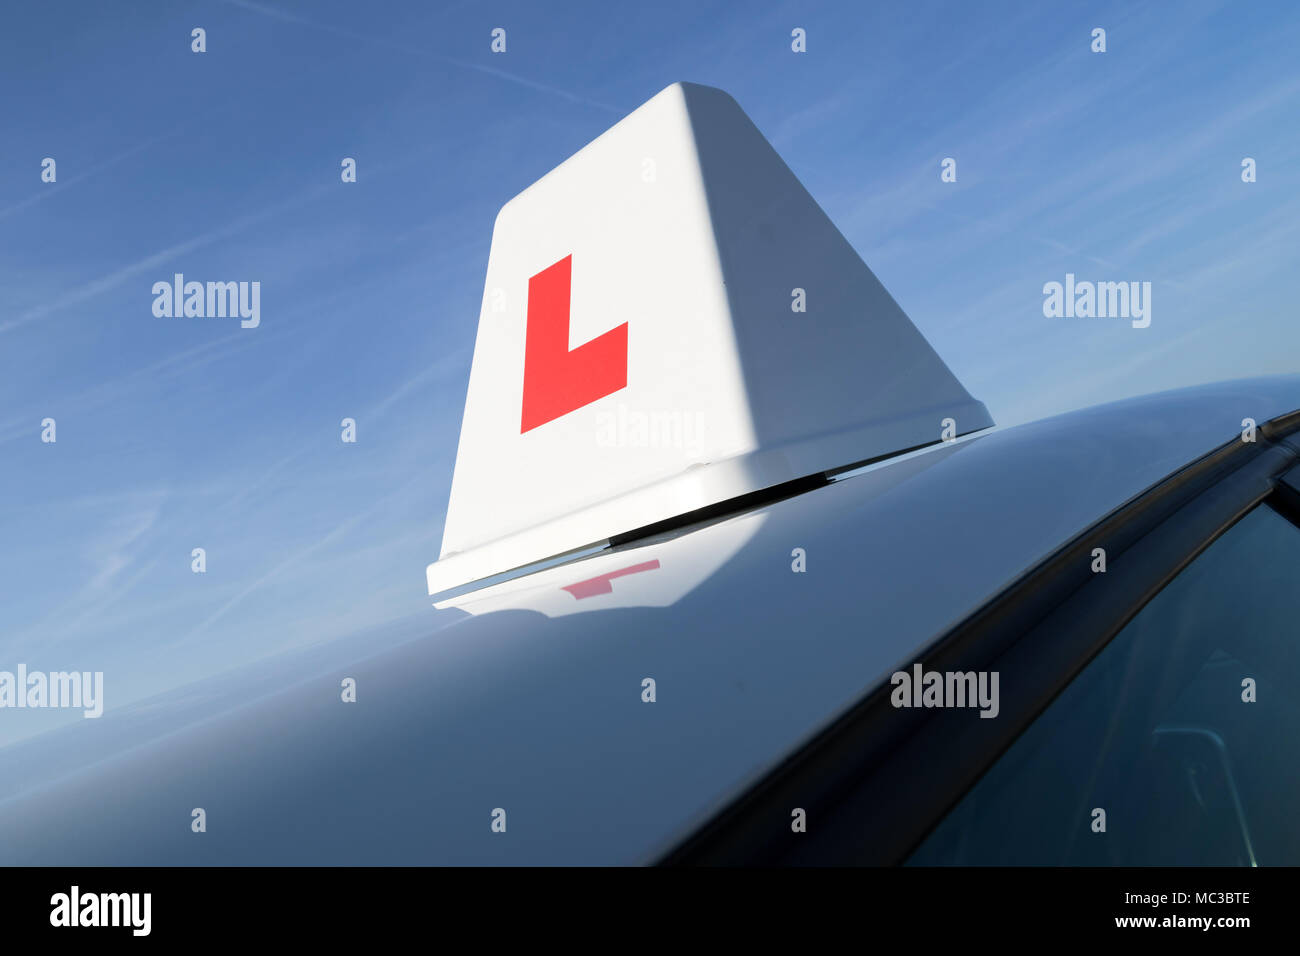 British driving school car roof sign Stock Photo